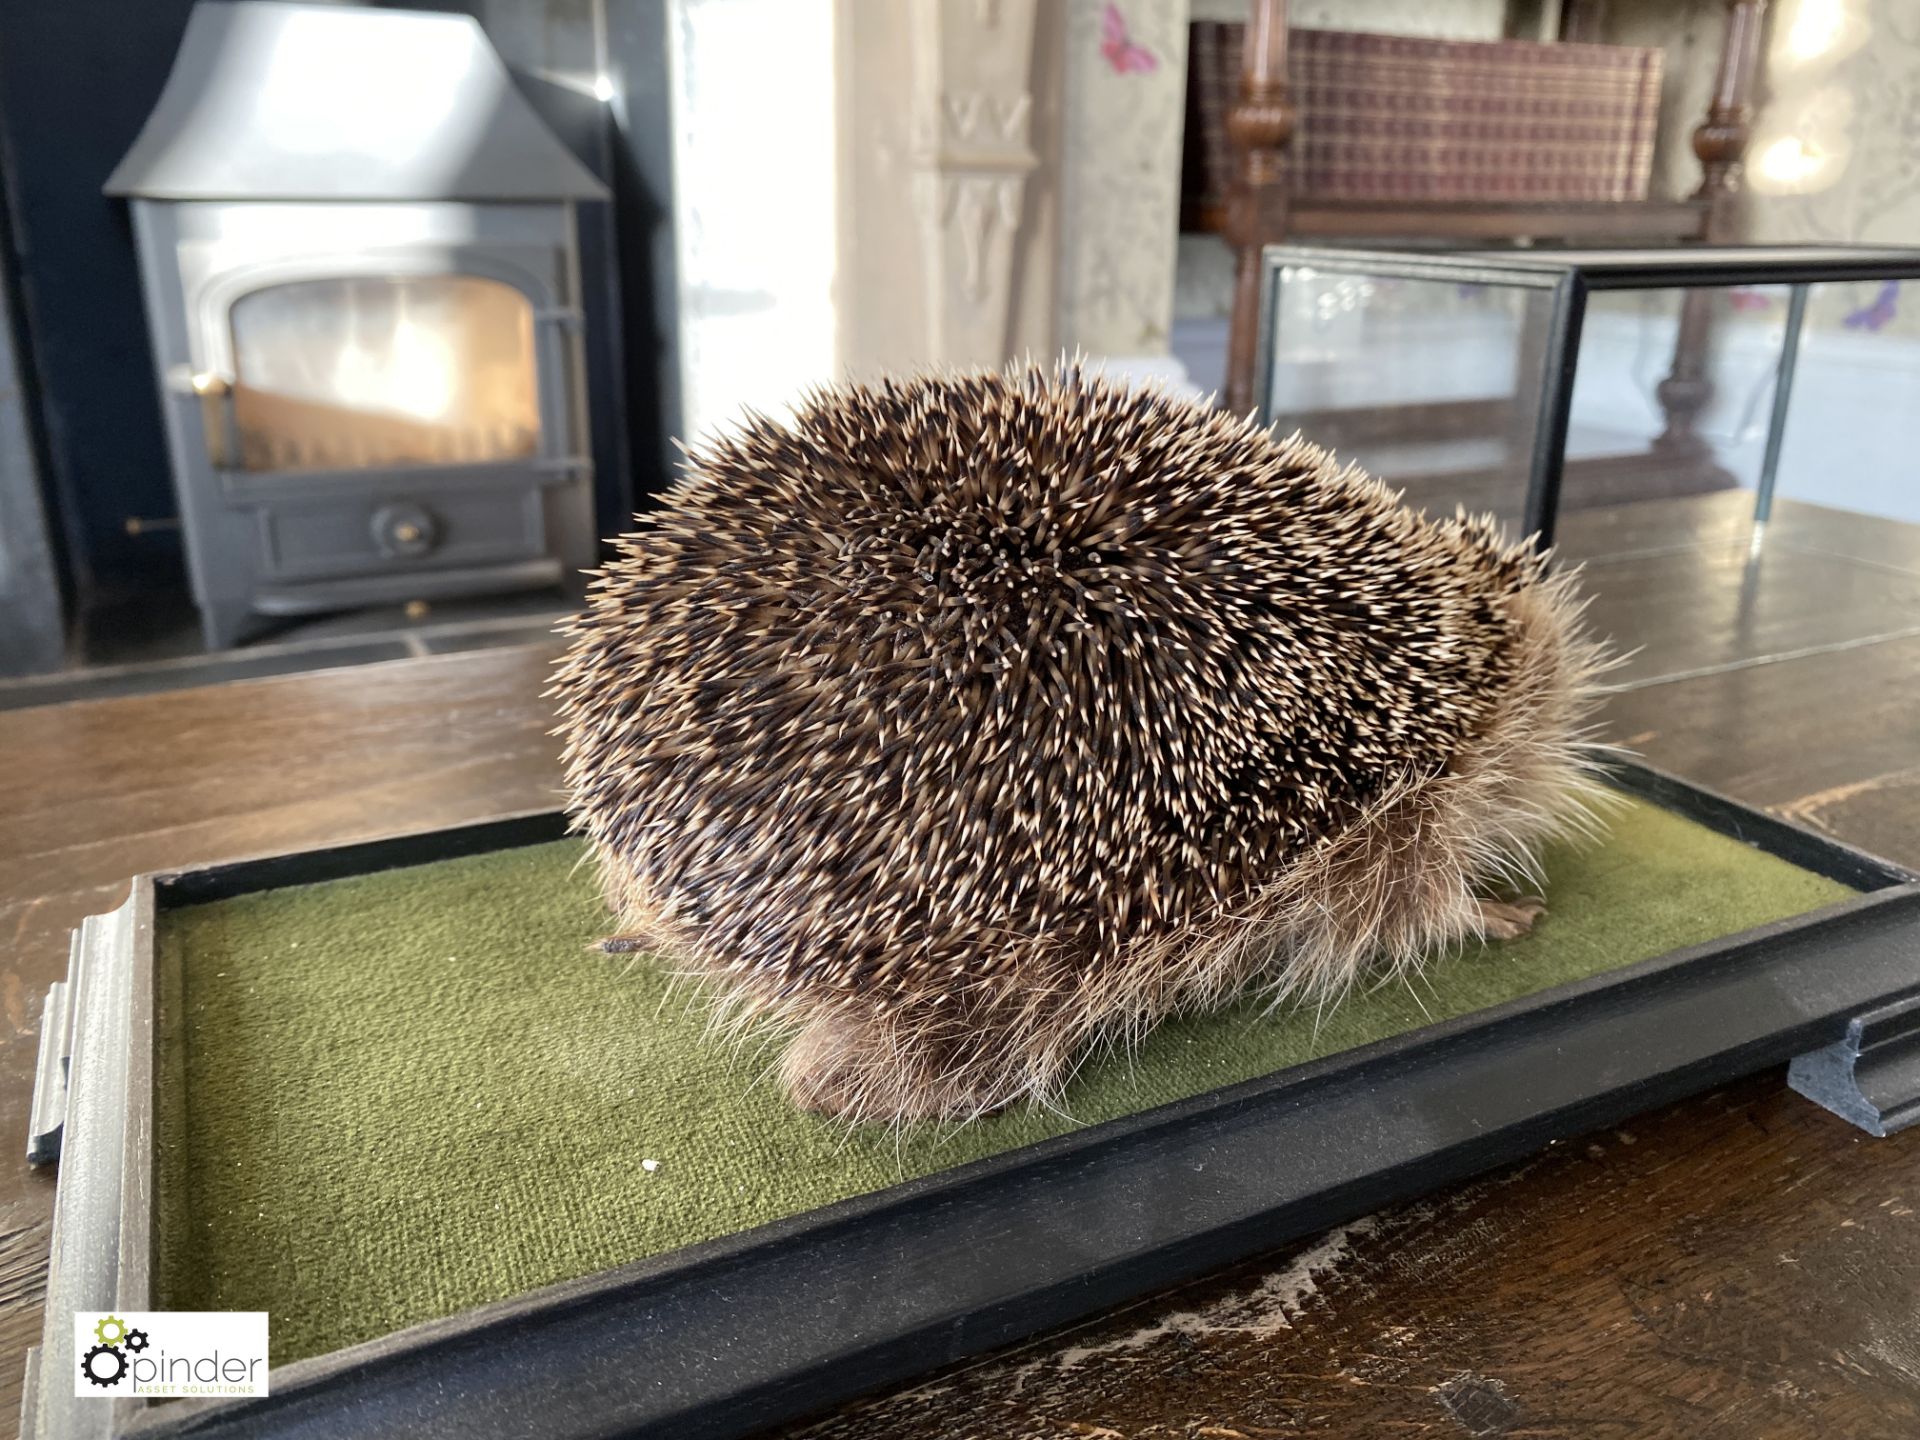 Taxidermy Hedgehog in glass case - Image 5 of 9